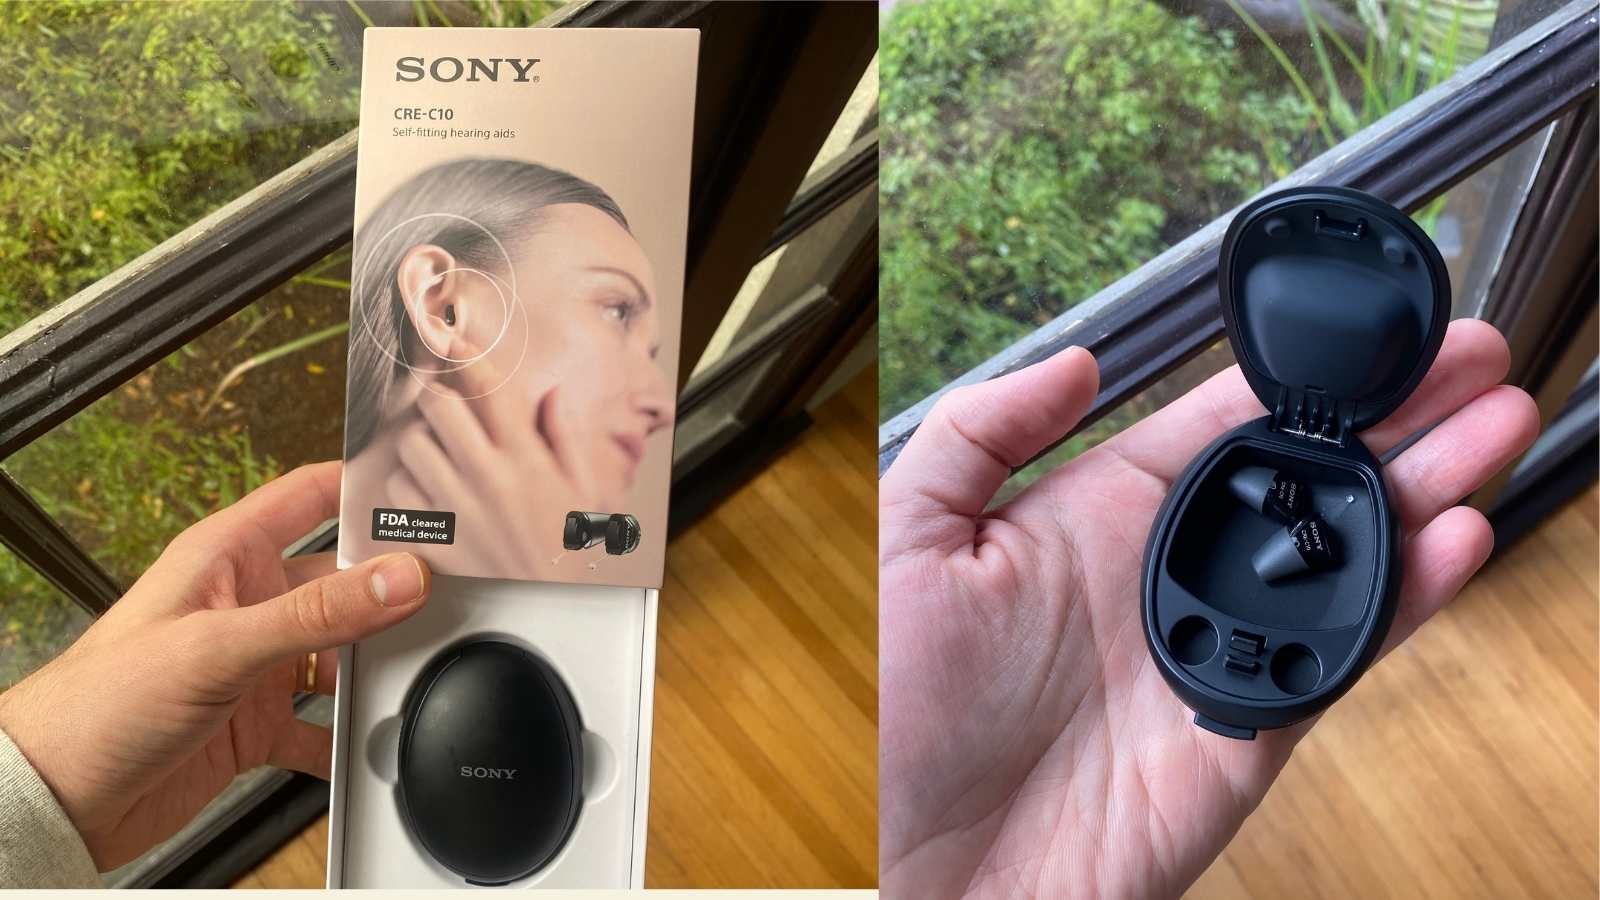 Sony CRE-C10 hearing aid unboxing